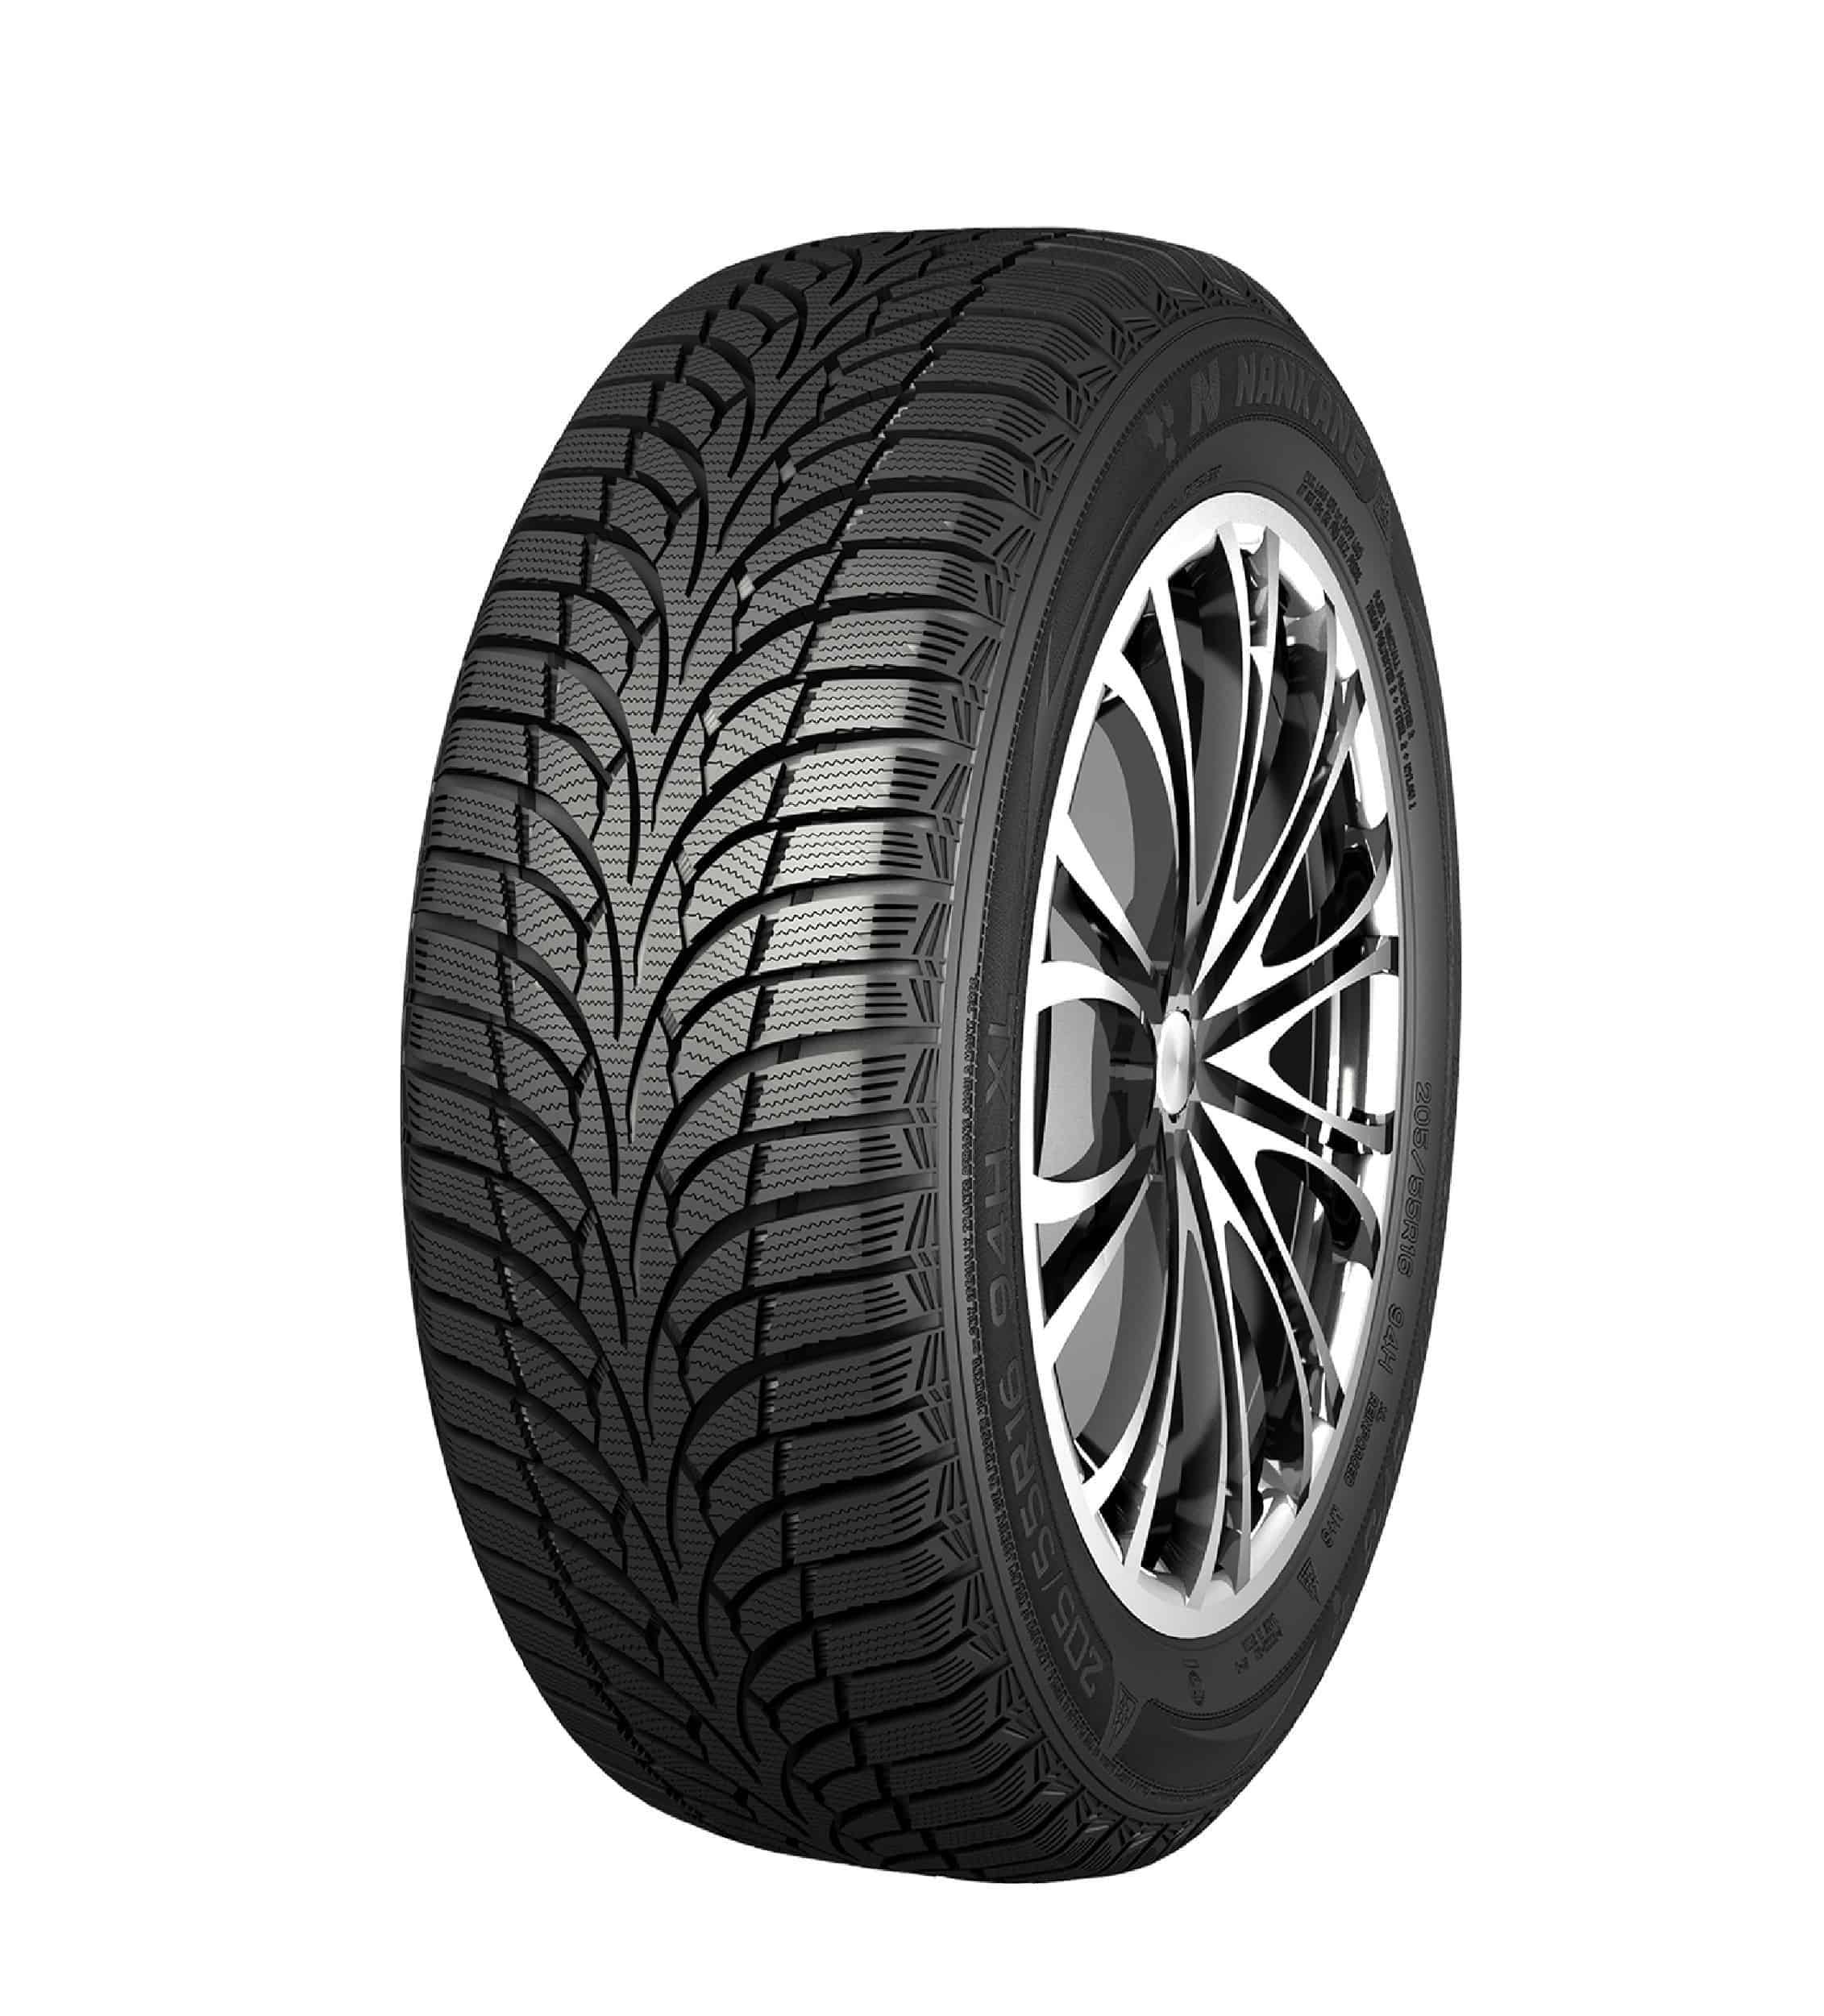 Gomme Nuove Nankang 235/60 R16 104H Winter Activa SV-3 XL M+S pneumatici nuovi Invernale